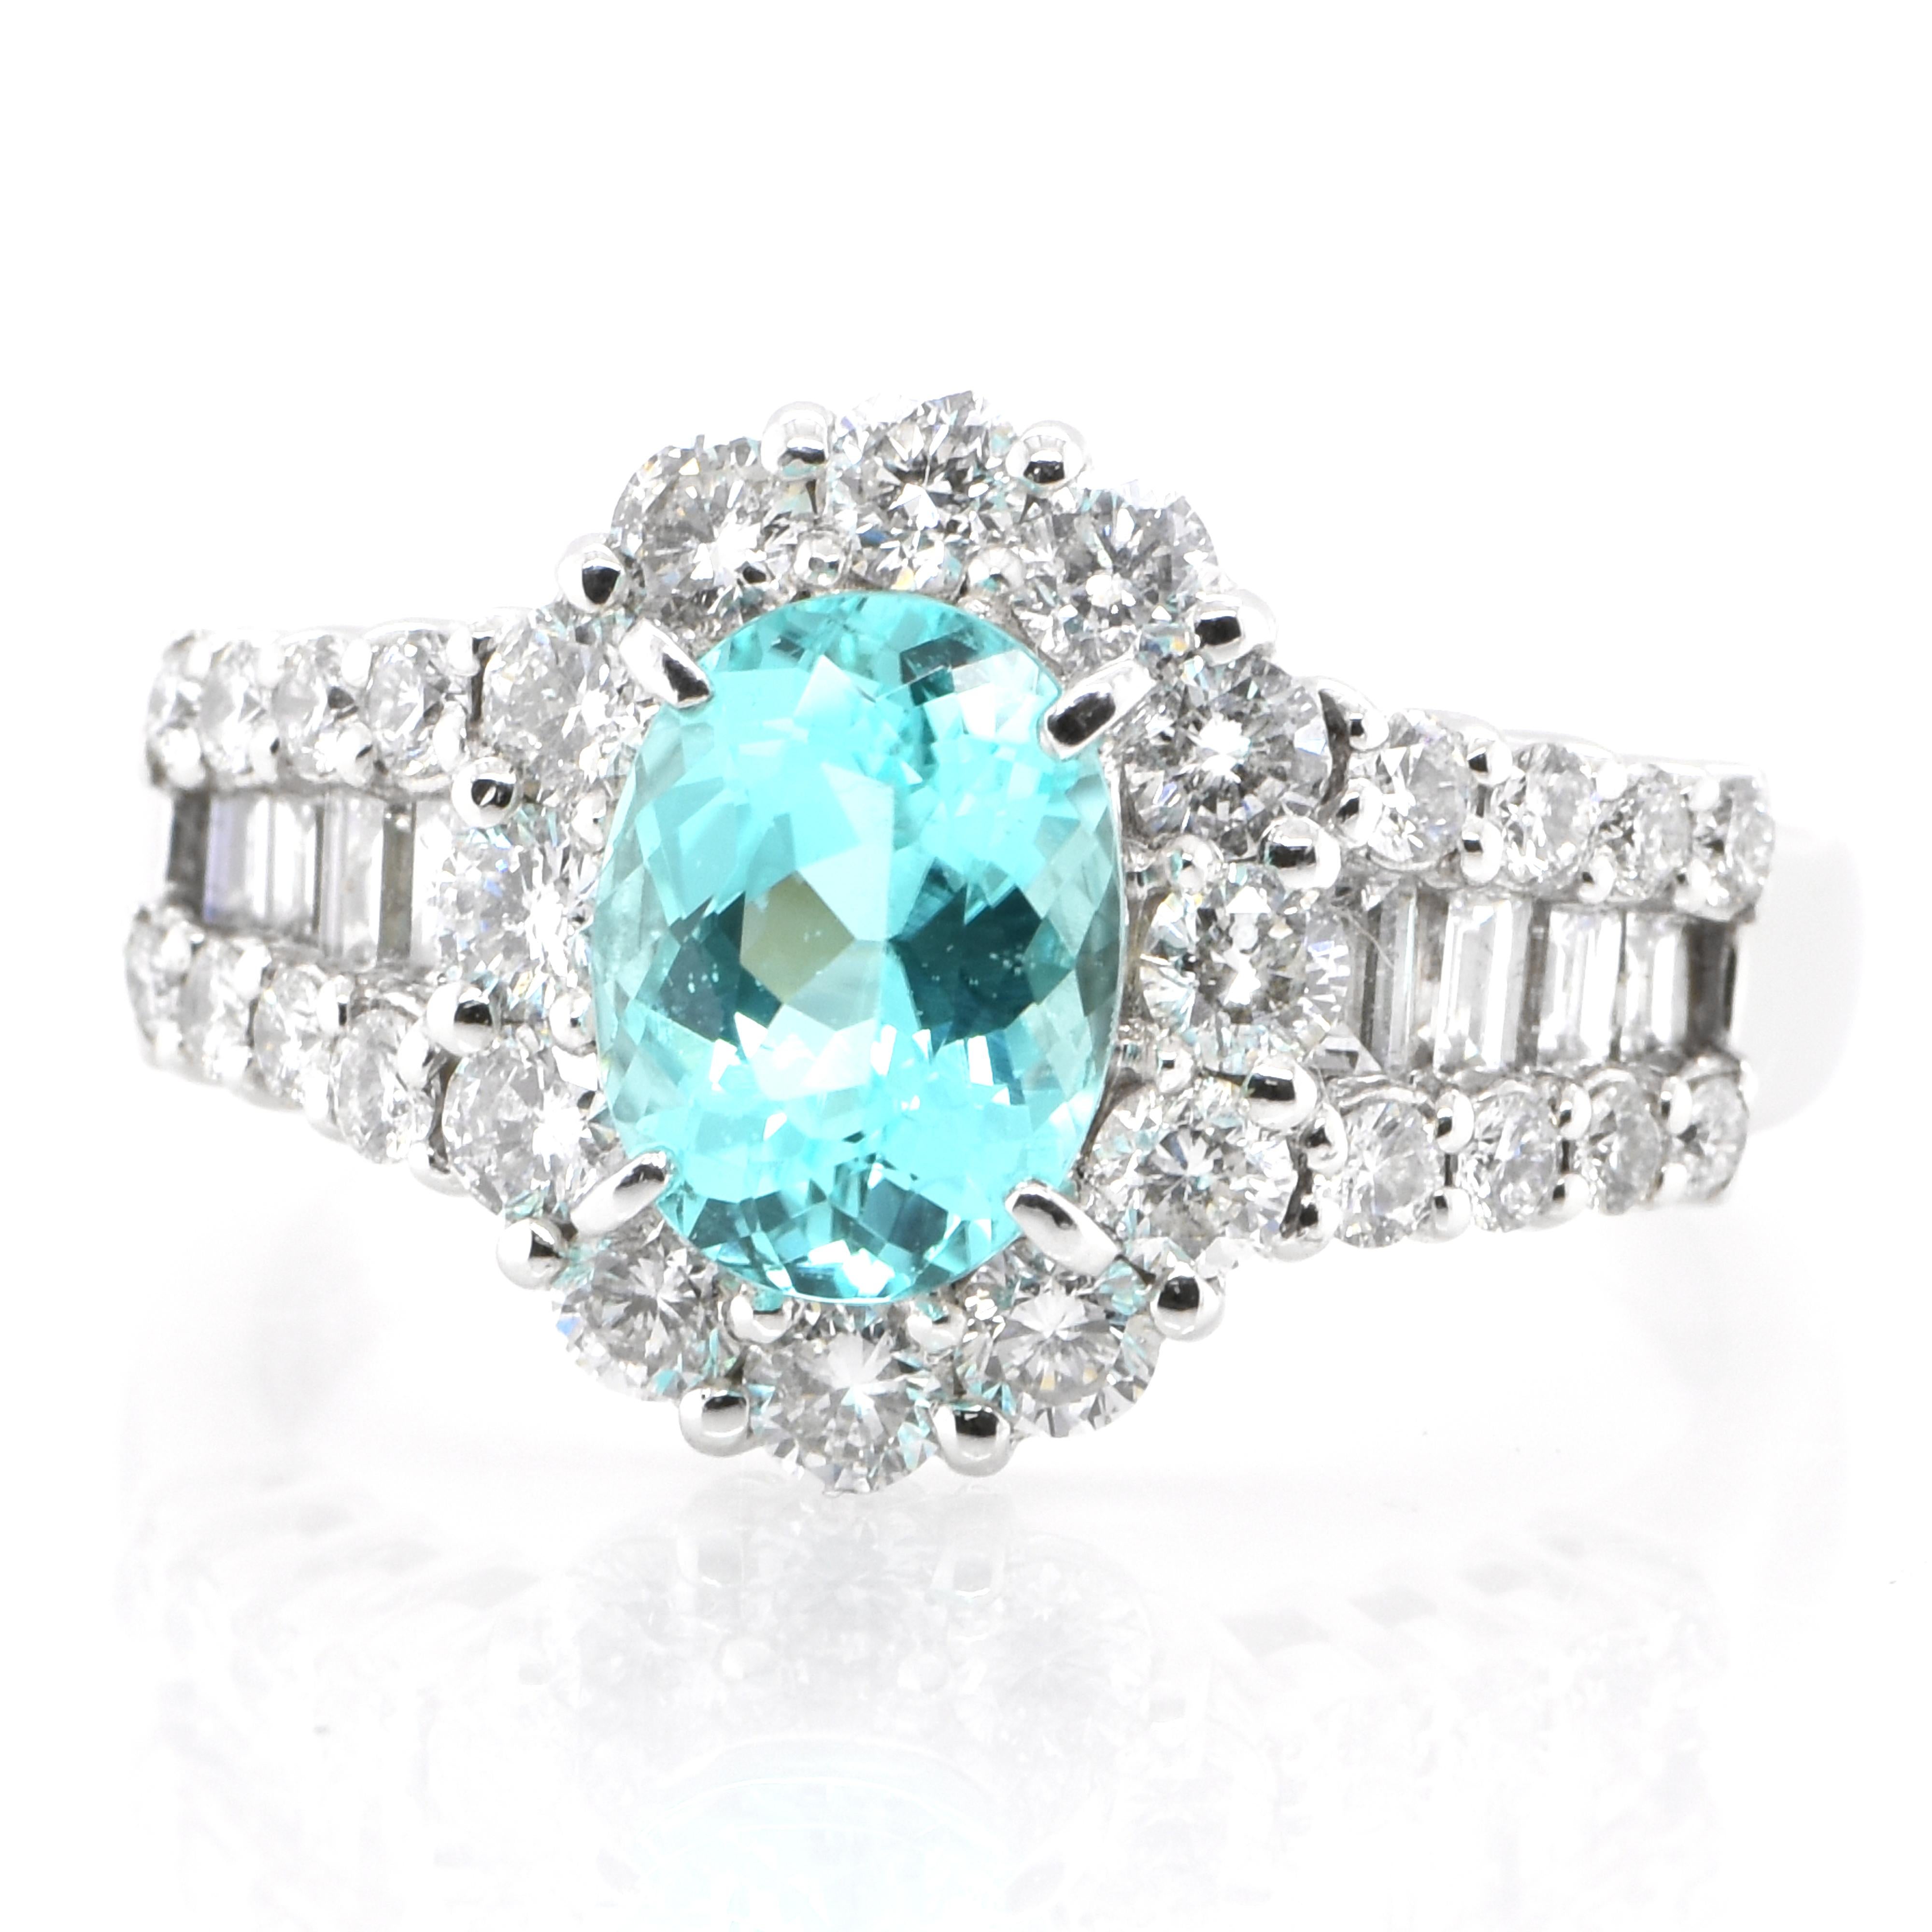 A beautiful ring featuring a GIA Certified 1.30 Carat Natural Mozambique Paraiba Tourmaline and 1.14 Carats of Diamond Accents set in Platinum. Paraiba Tourmalines were only discovered 30 years ago in the Brazilian state of the same name- Paraiba.